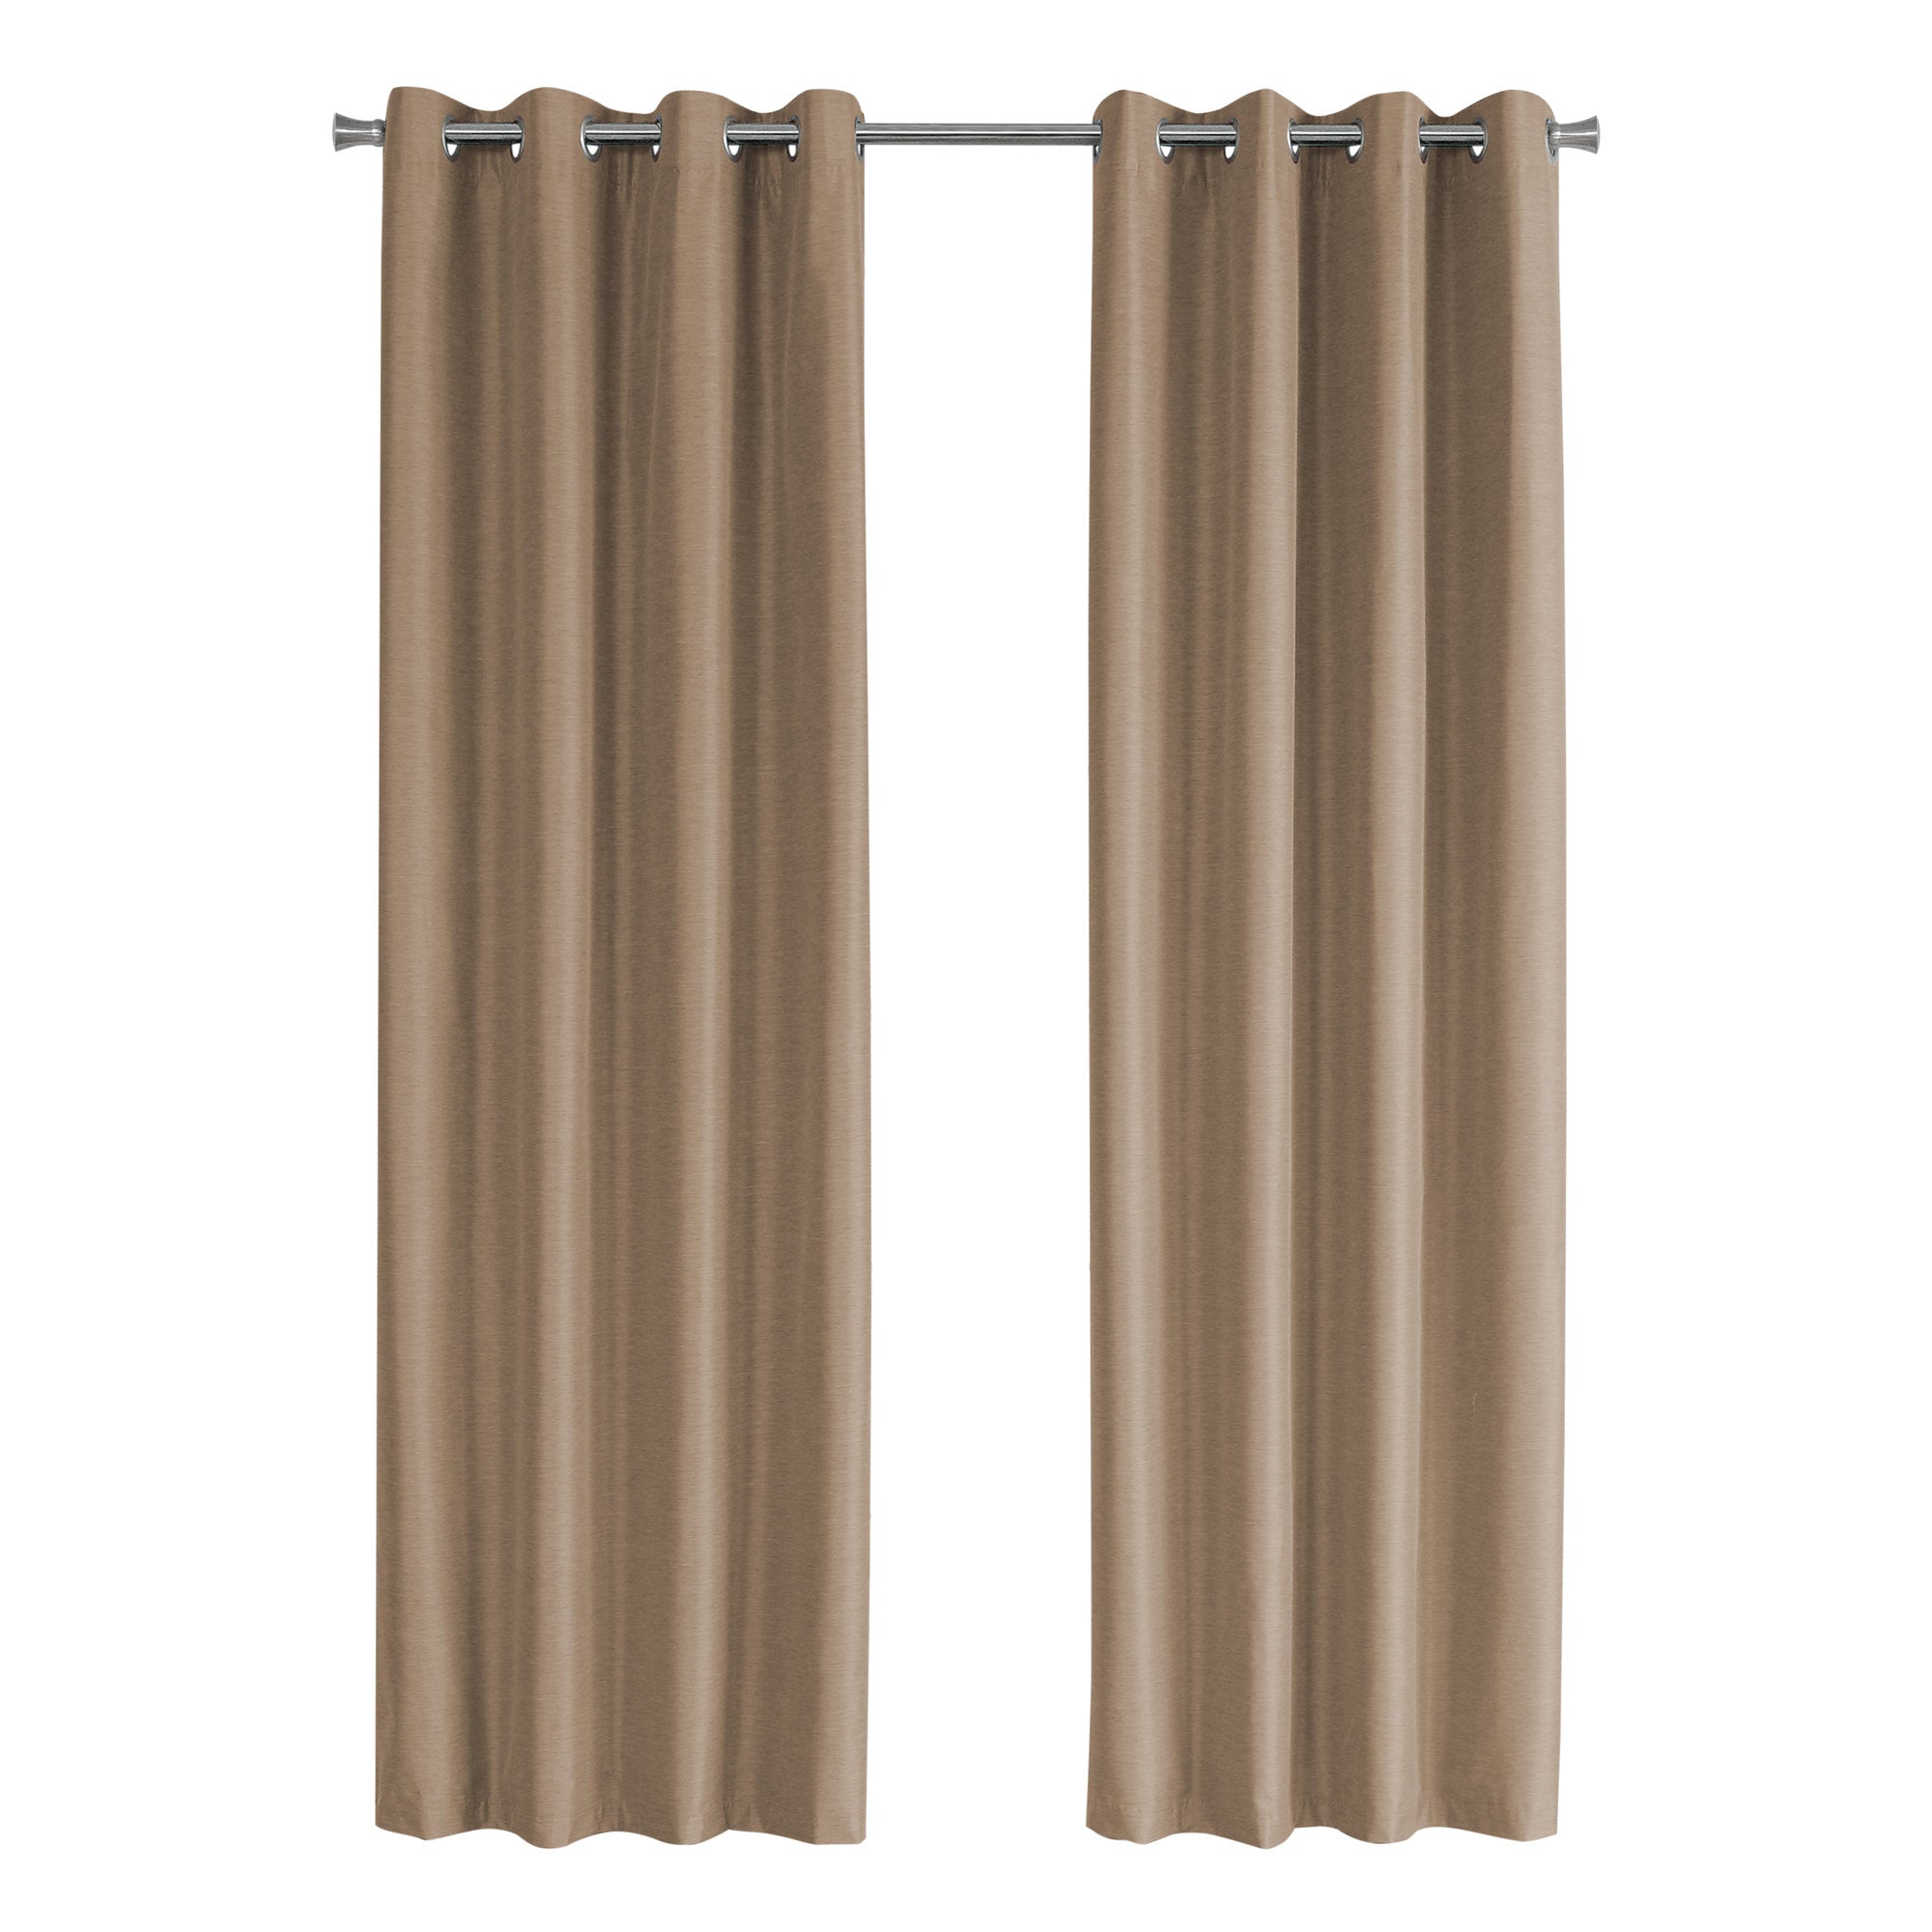 Curtain Panel - 2Pcs / 52W X 84H Brown Solid Blackout